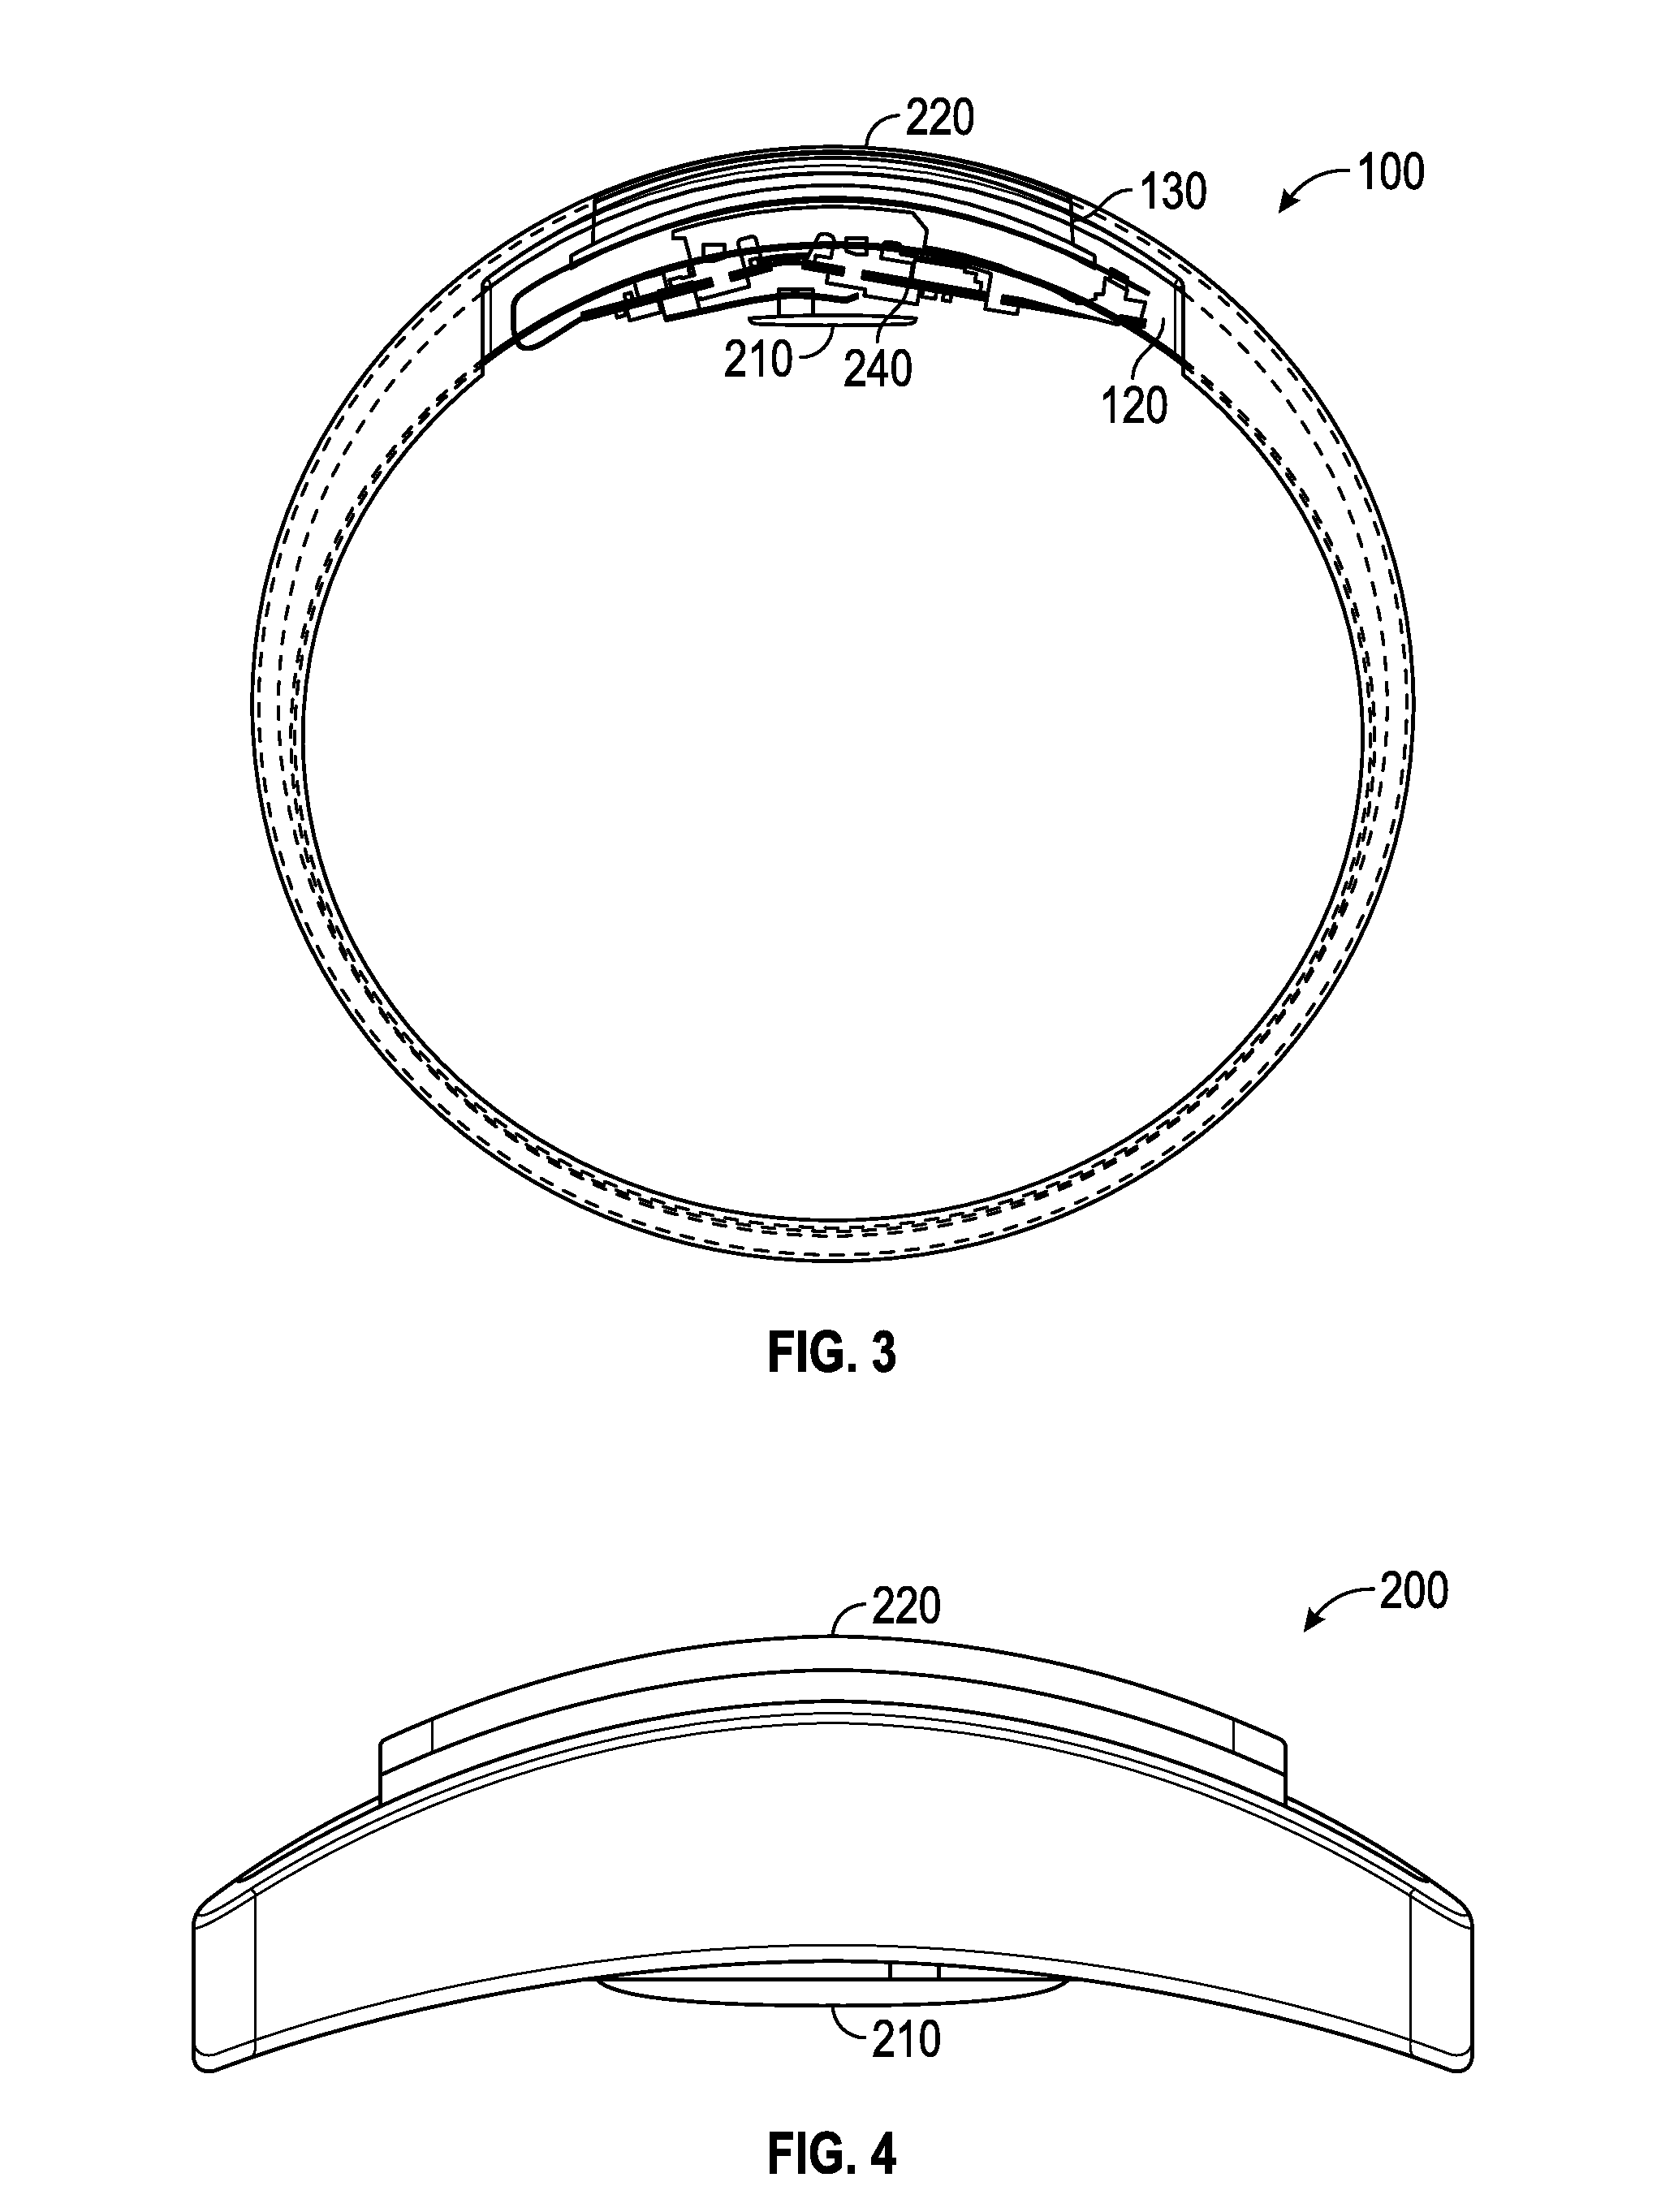 System and method for providing a training load schedule for peak performance positioning